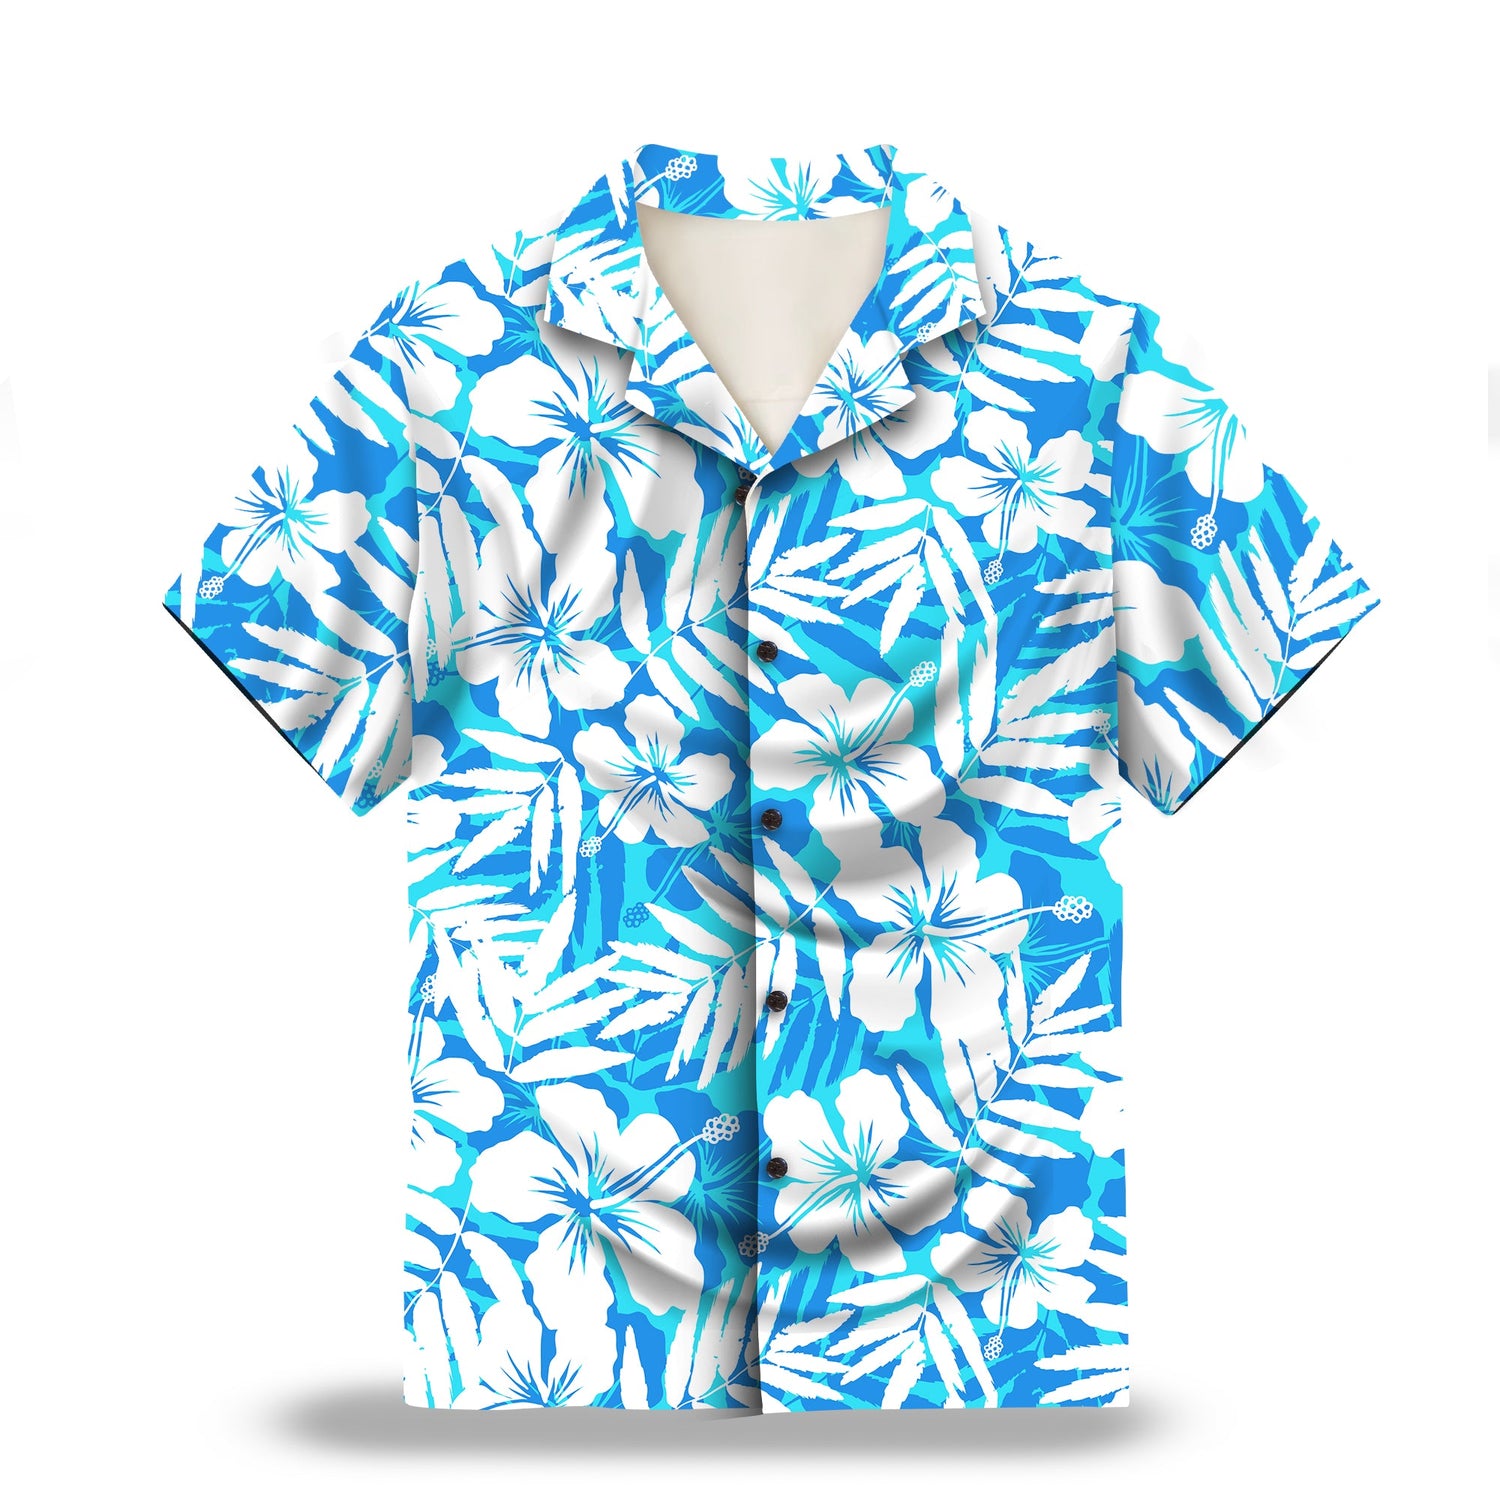 Image: Hibiscus Silhouette in Blue and White Custom Hawaiian Shirt. Featuring elegant hibiscus flower silhouettes in a blue and white color scheme, perfect for a tropical summer vibe. Alt text for accessibility.